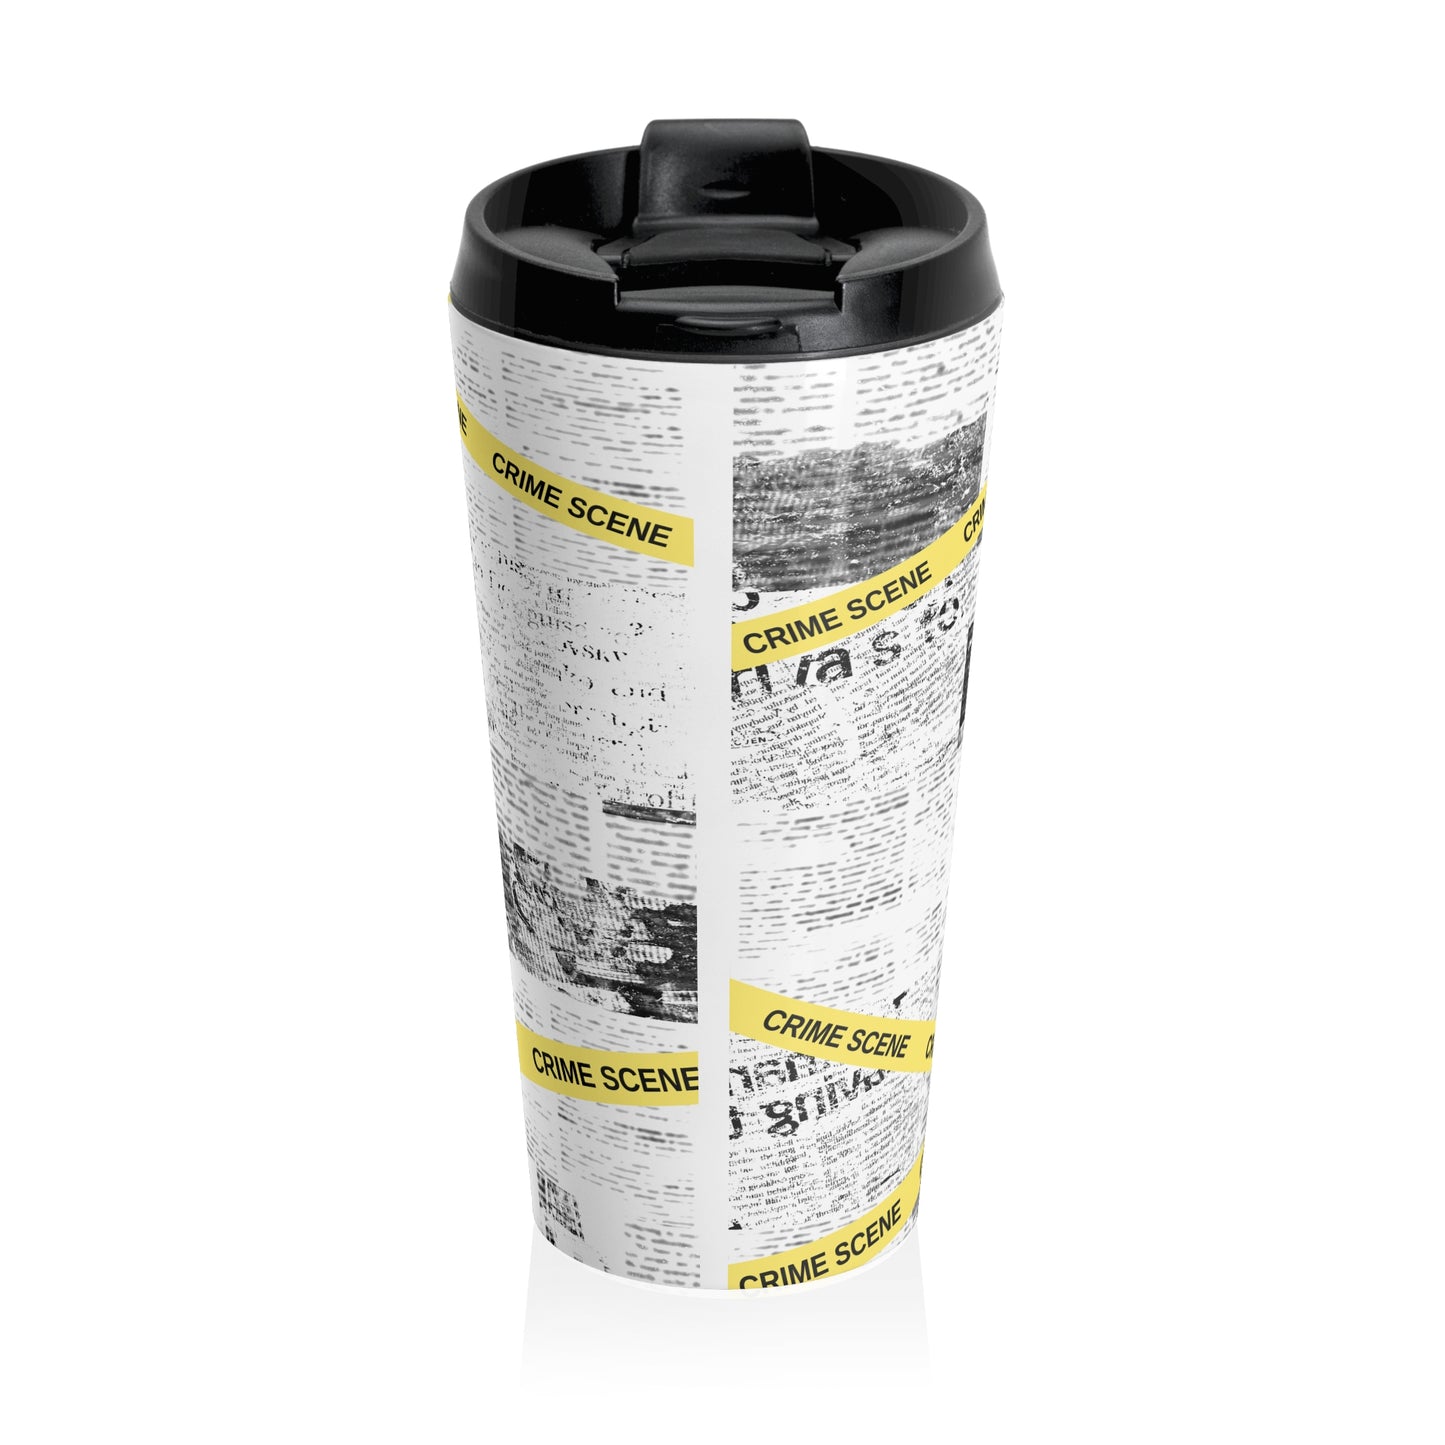 If At First You Don't Succed Stainless Steel Travel Mug